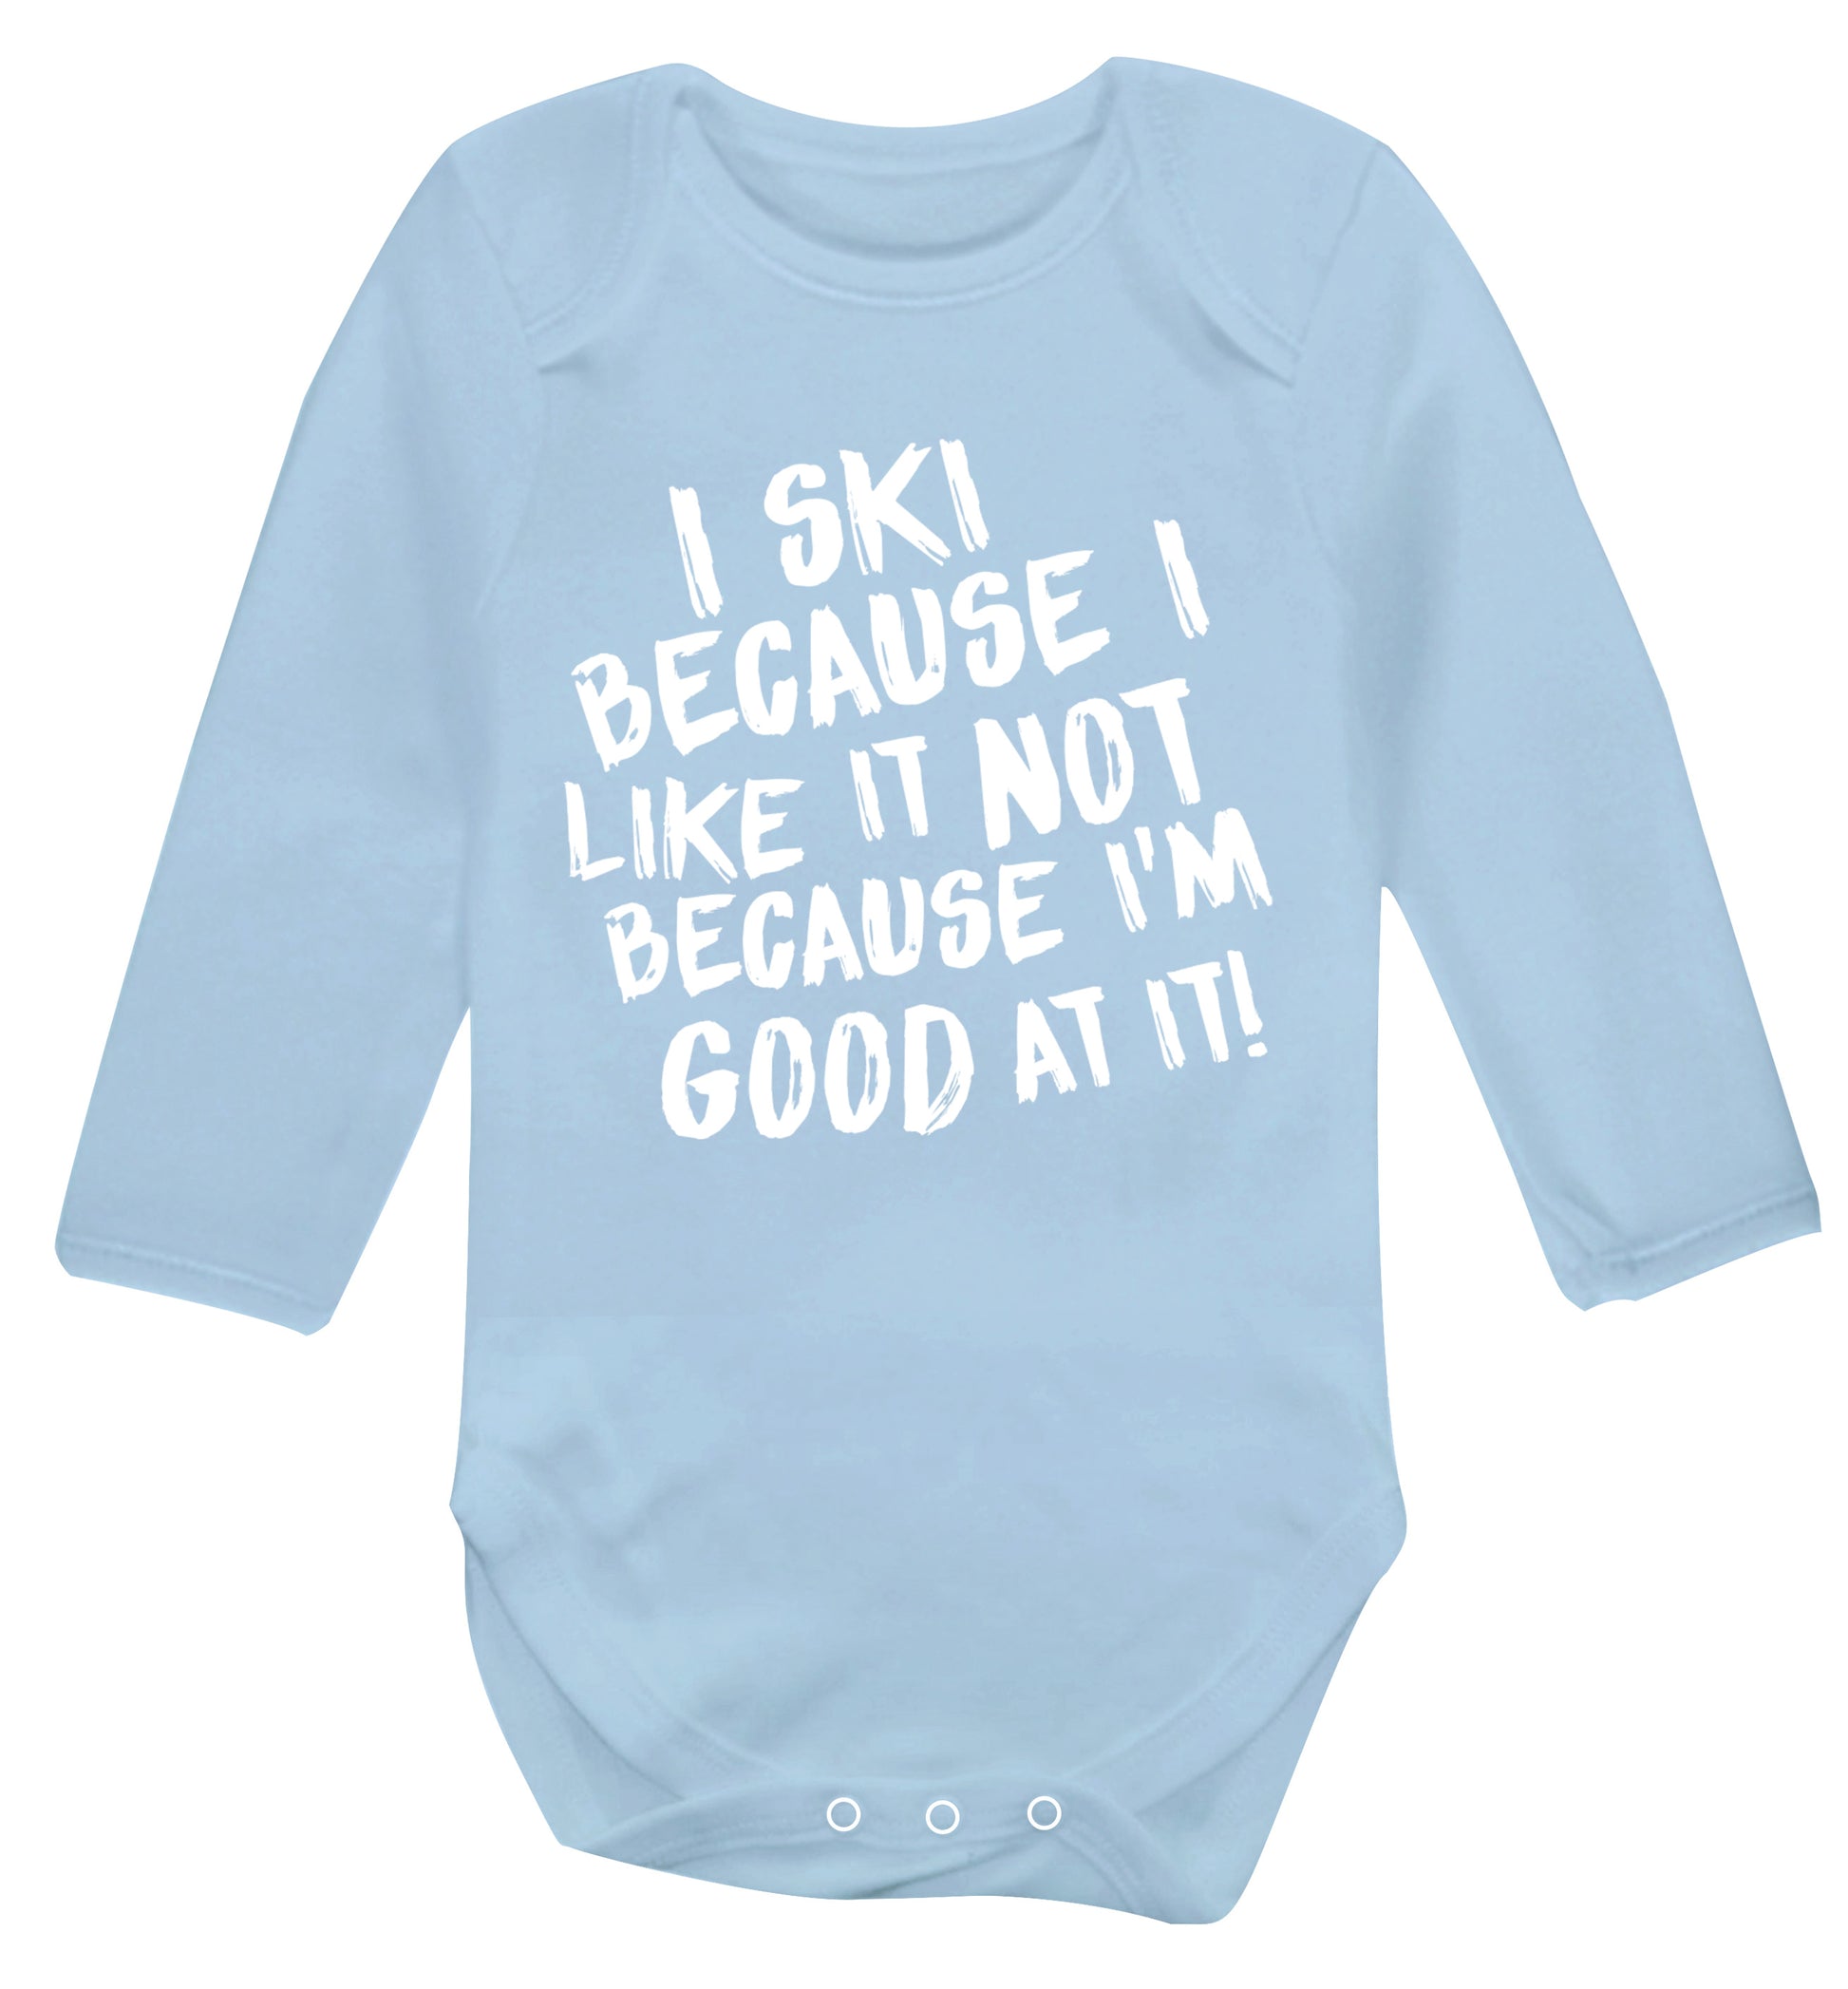 I ski because I like it not because I'm good at it Baby Vest long sleeved pale blue 6-12 months